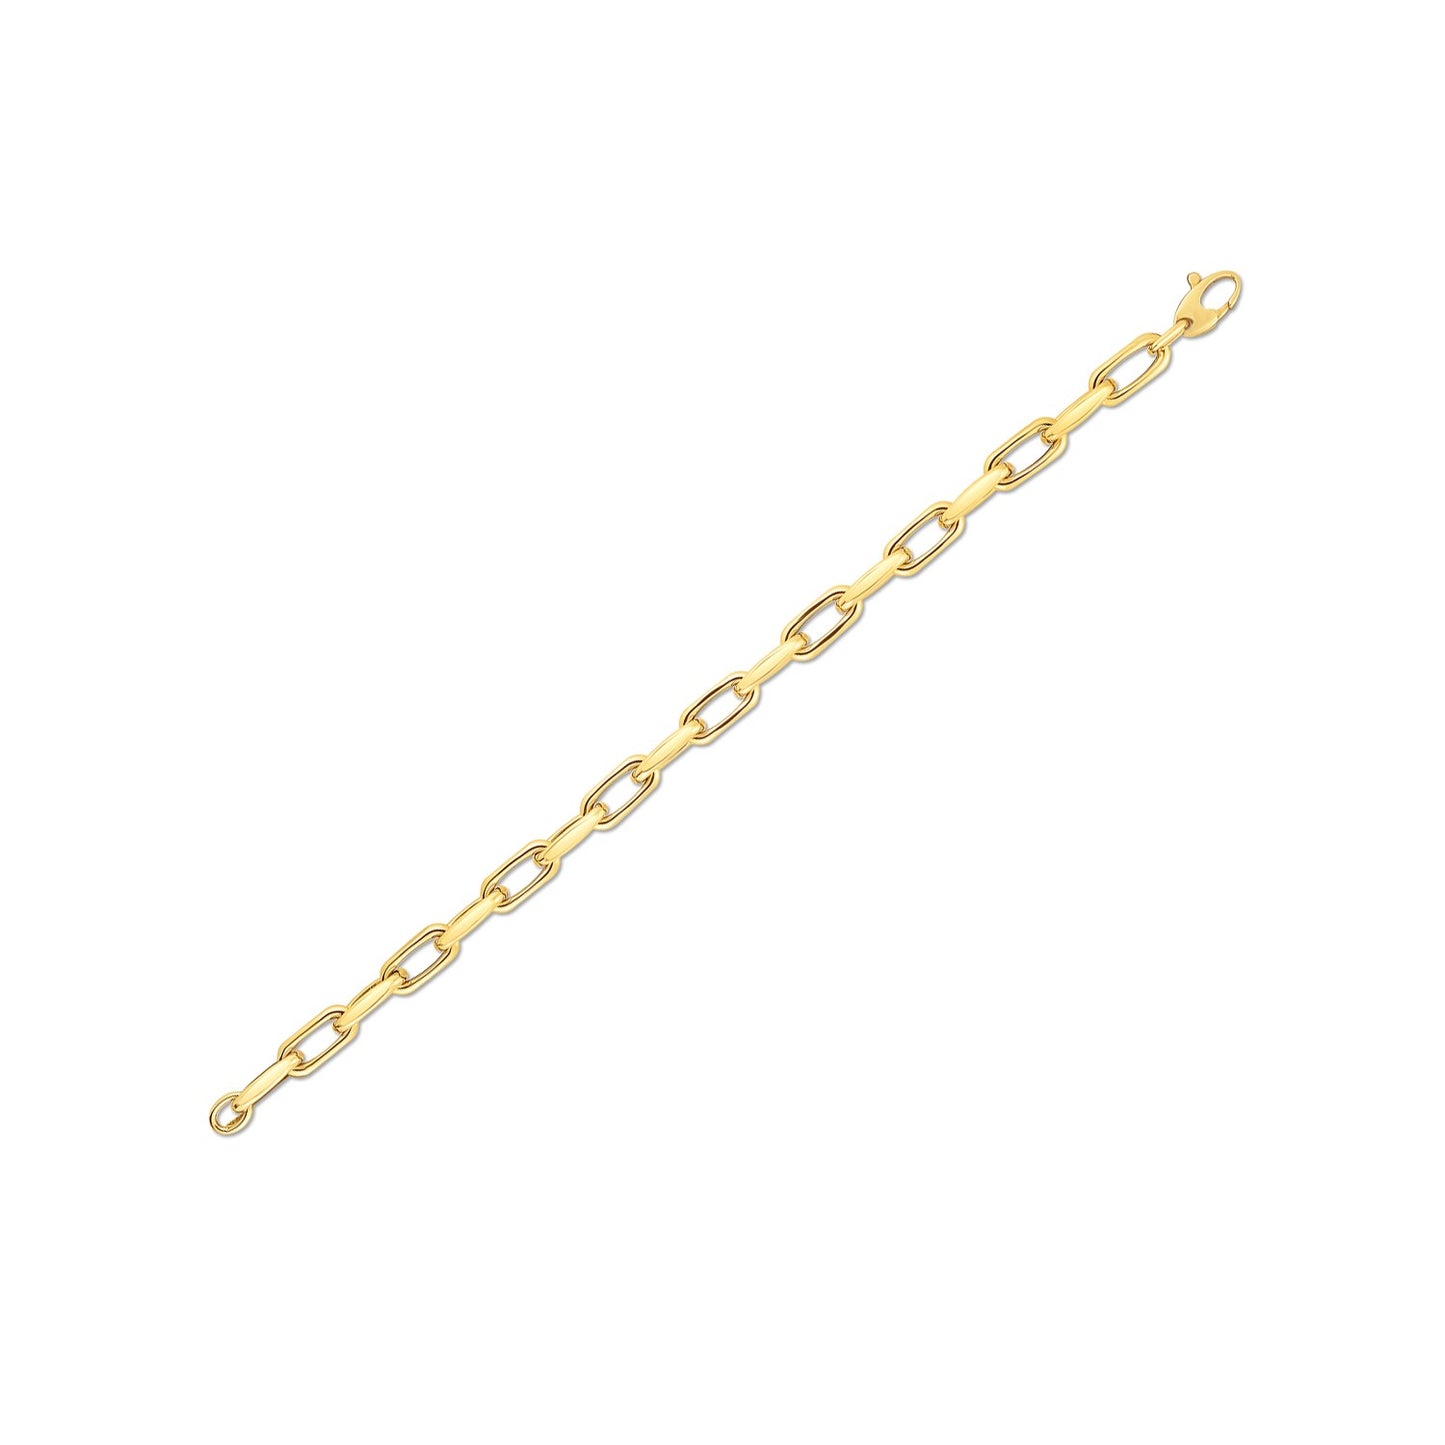 14k Yellow Gold French Cable Link Bracelet (6mm)